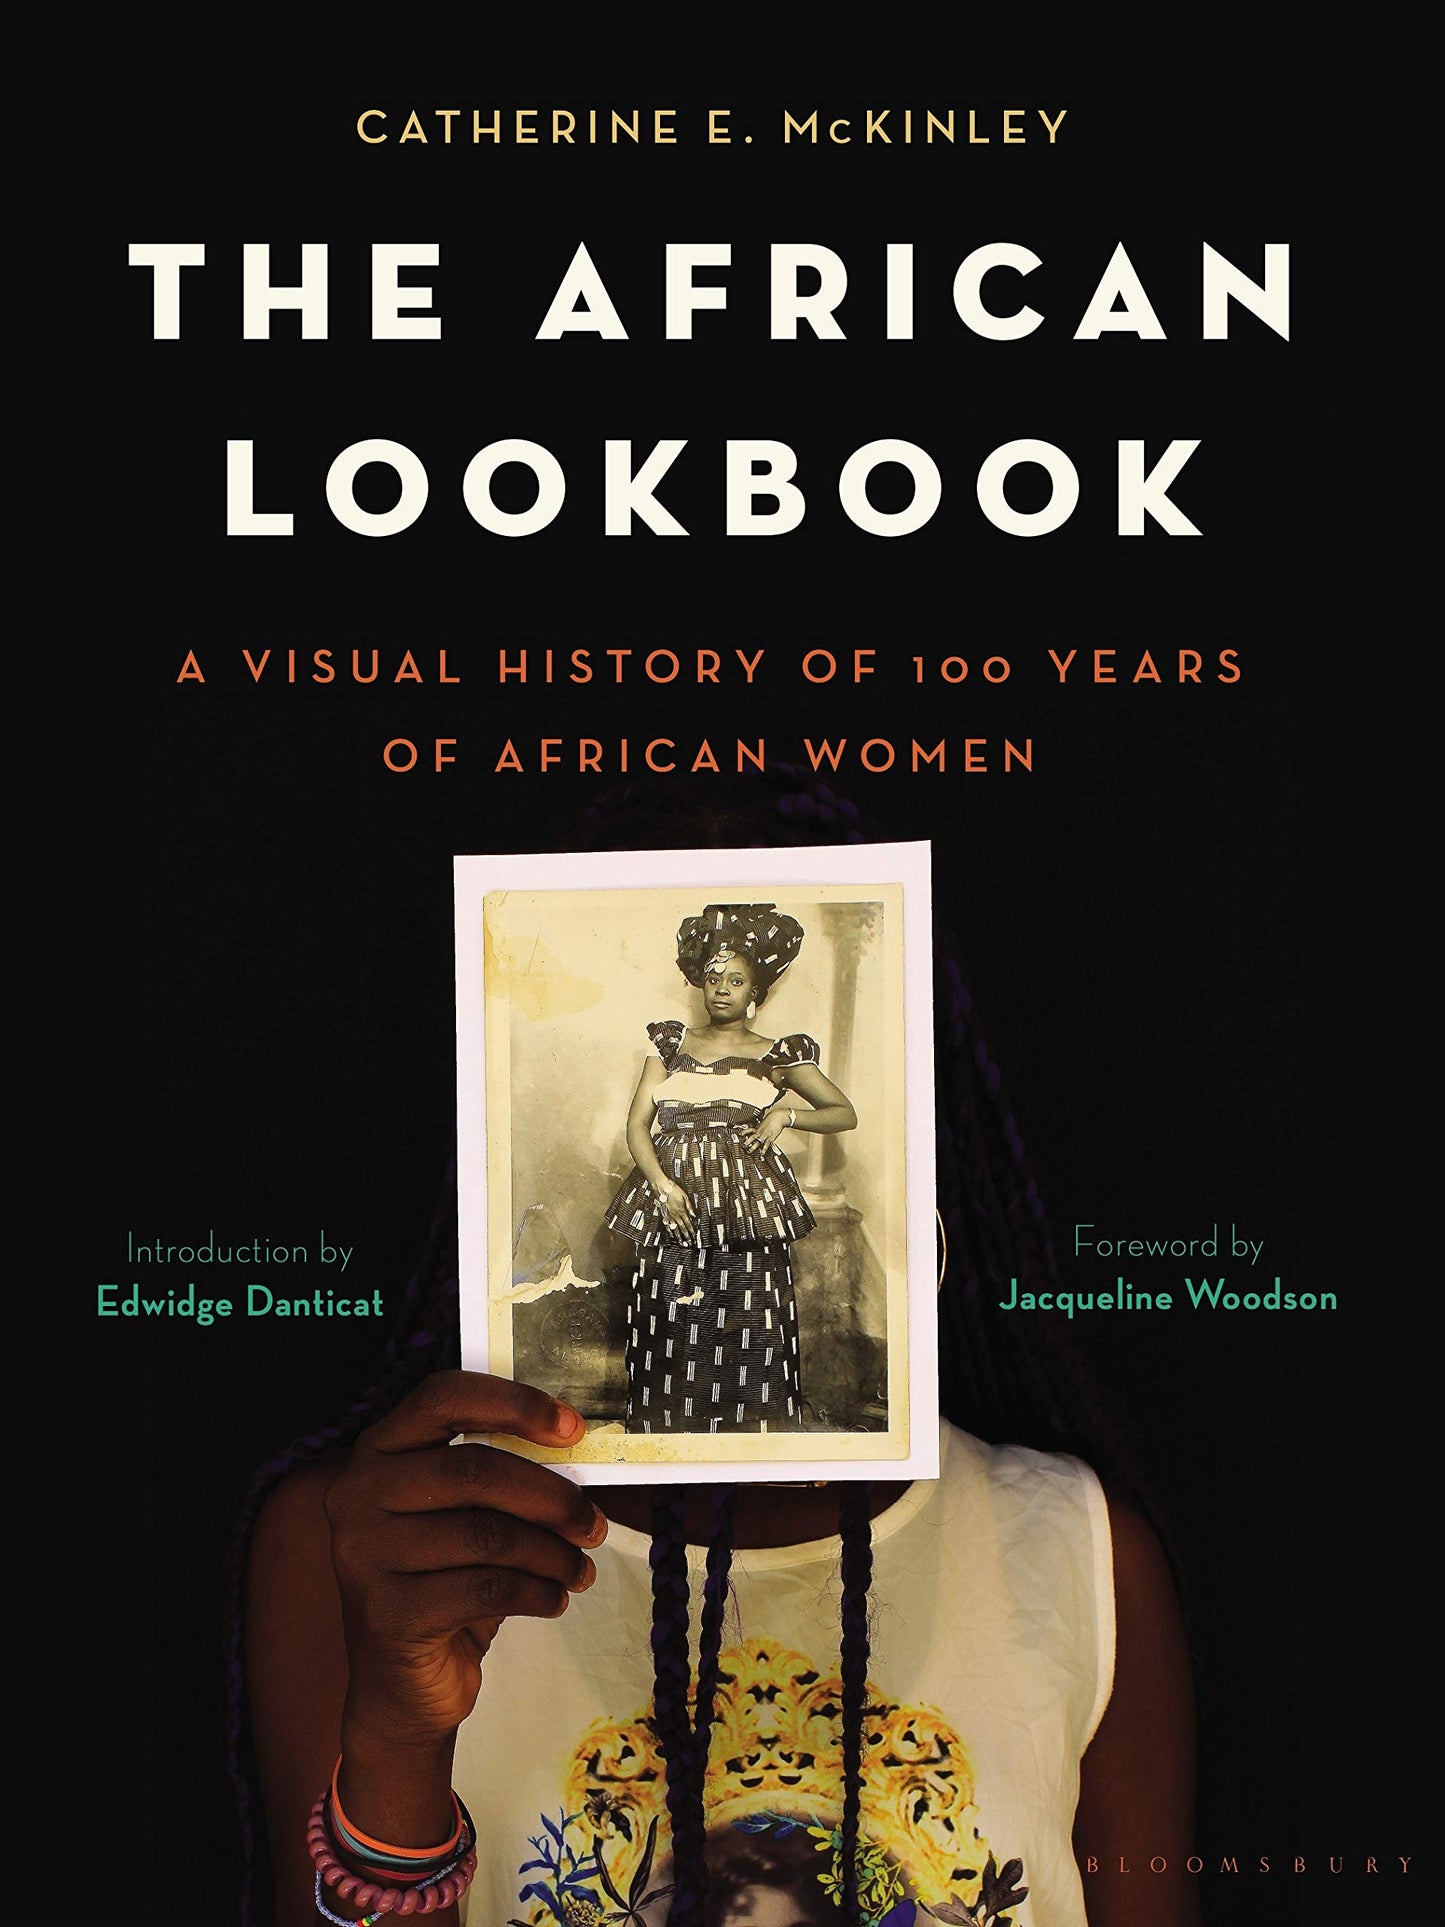 The African Lookbook: A Visual History of 100 Years of African Women (Hardcover)